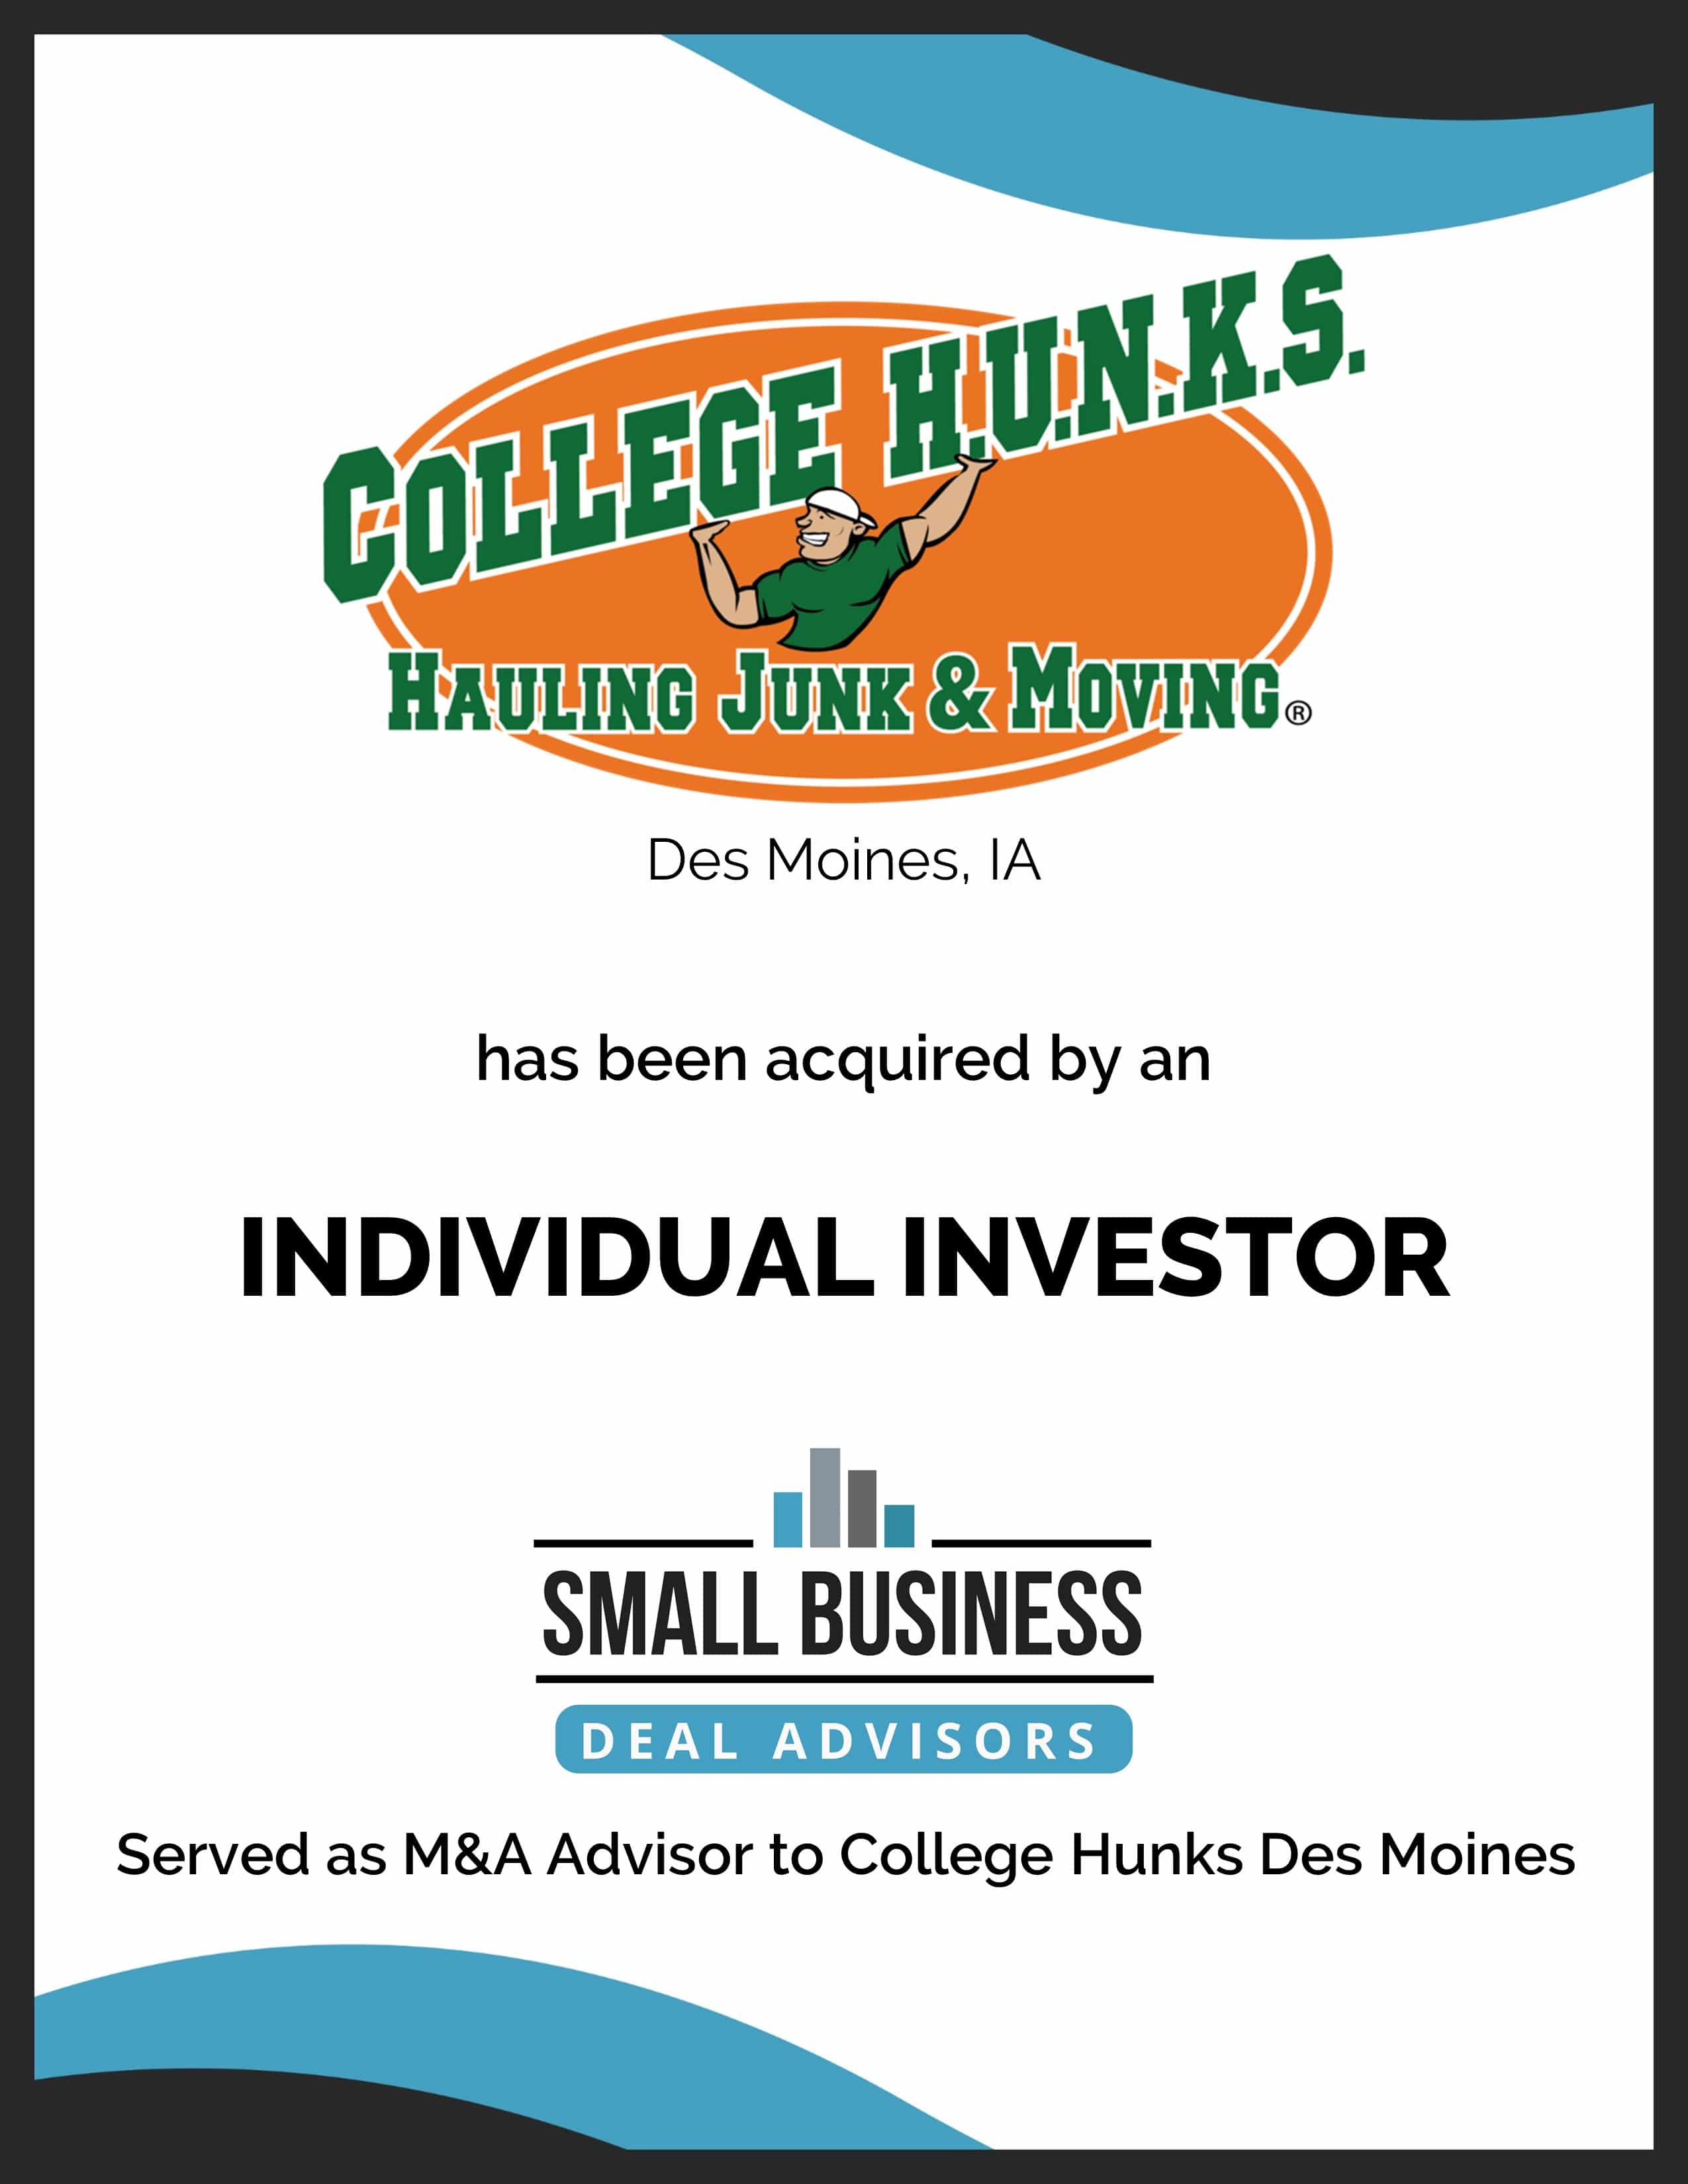 College Hunks Des Moines Sold to an Individual Investor